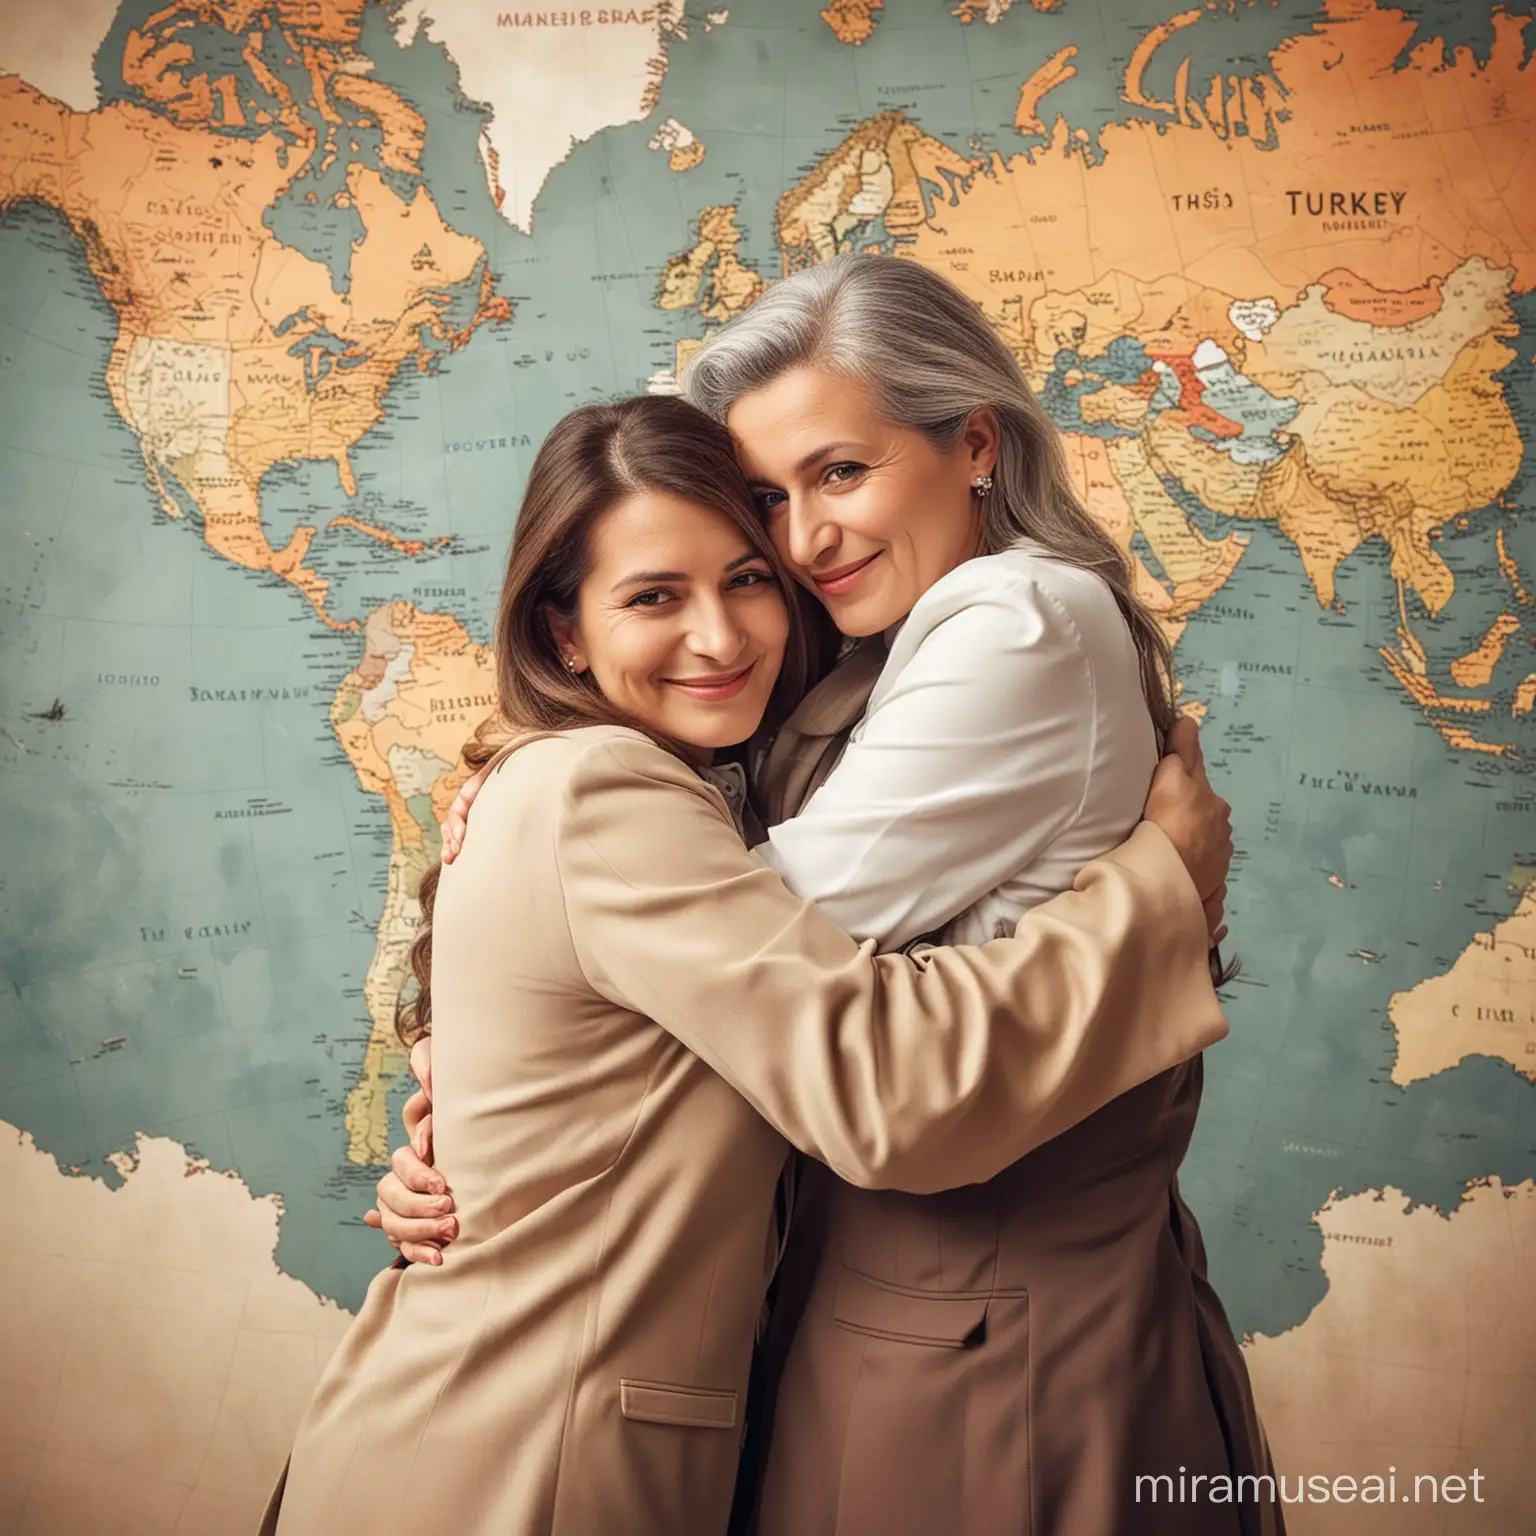 Three politician woman hugging to world map. Like she is the mother of Turkey. She is looking friendly and protectionist. Her clothes are formal. 